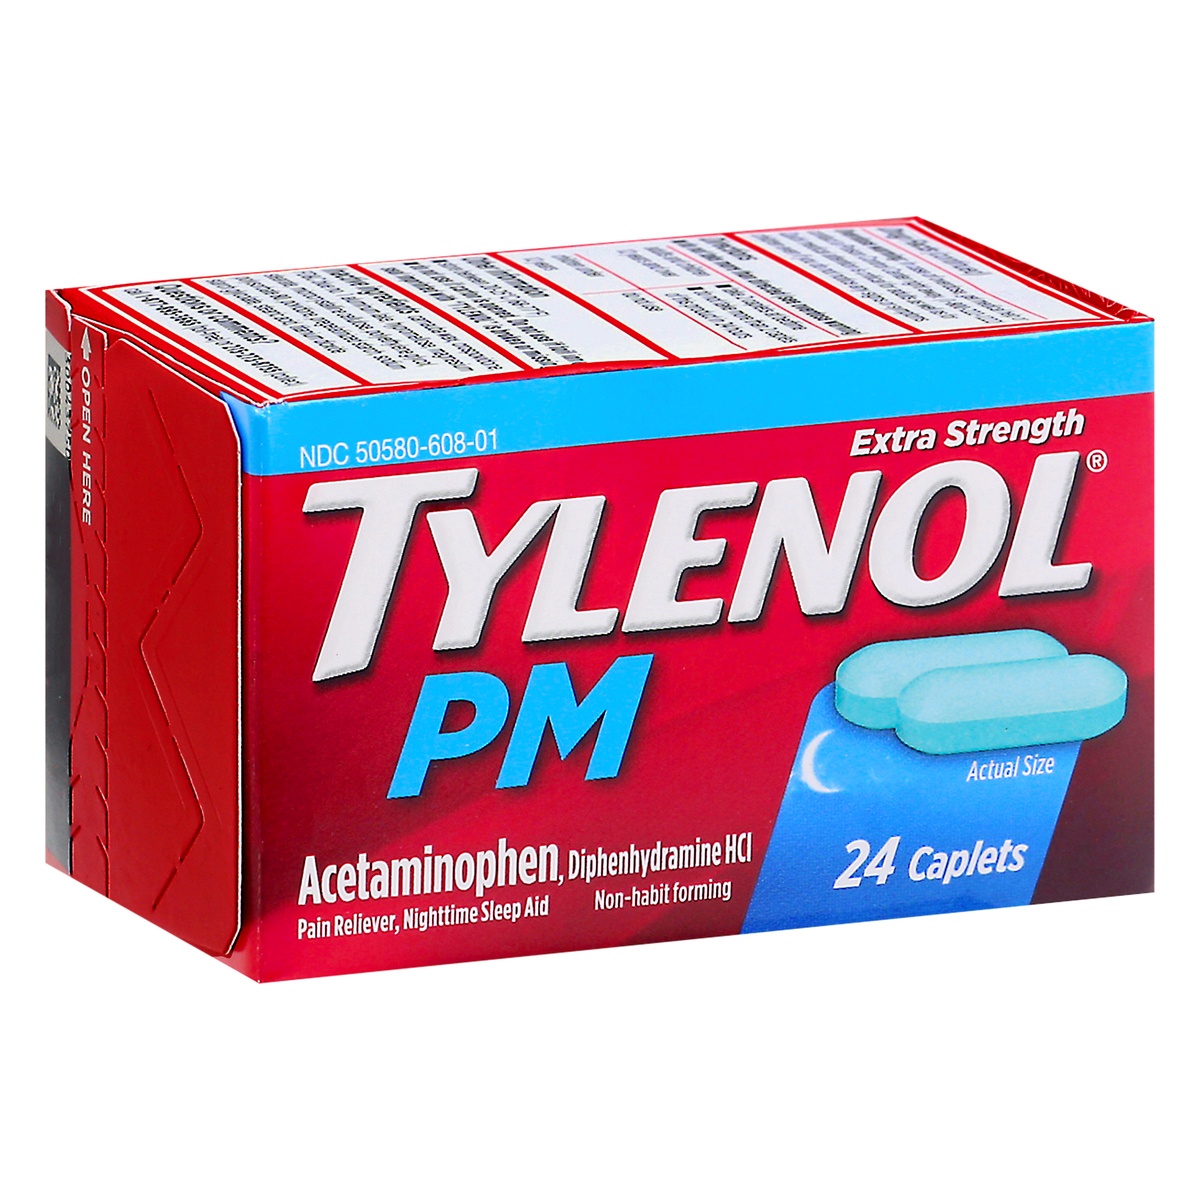 slide 10 of 10, Tylenol PM Extra Strength Nighttime Pain Reliever & Sleep Aid Caplets Acetaminophen & Diphenhydramine HCl, Relief for Nighttime Aches & Pains, Non-Habit Forming, 24 ct